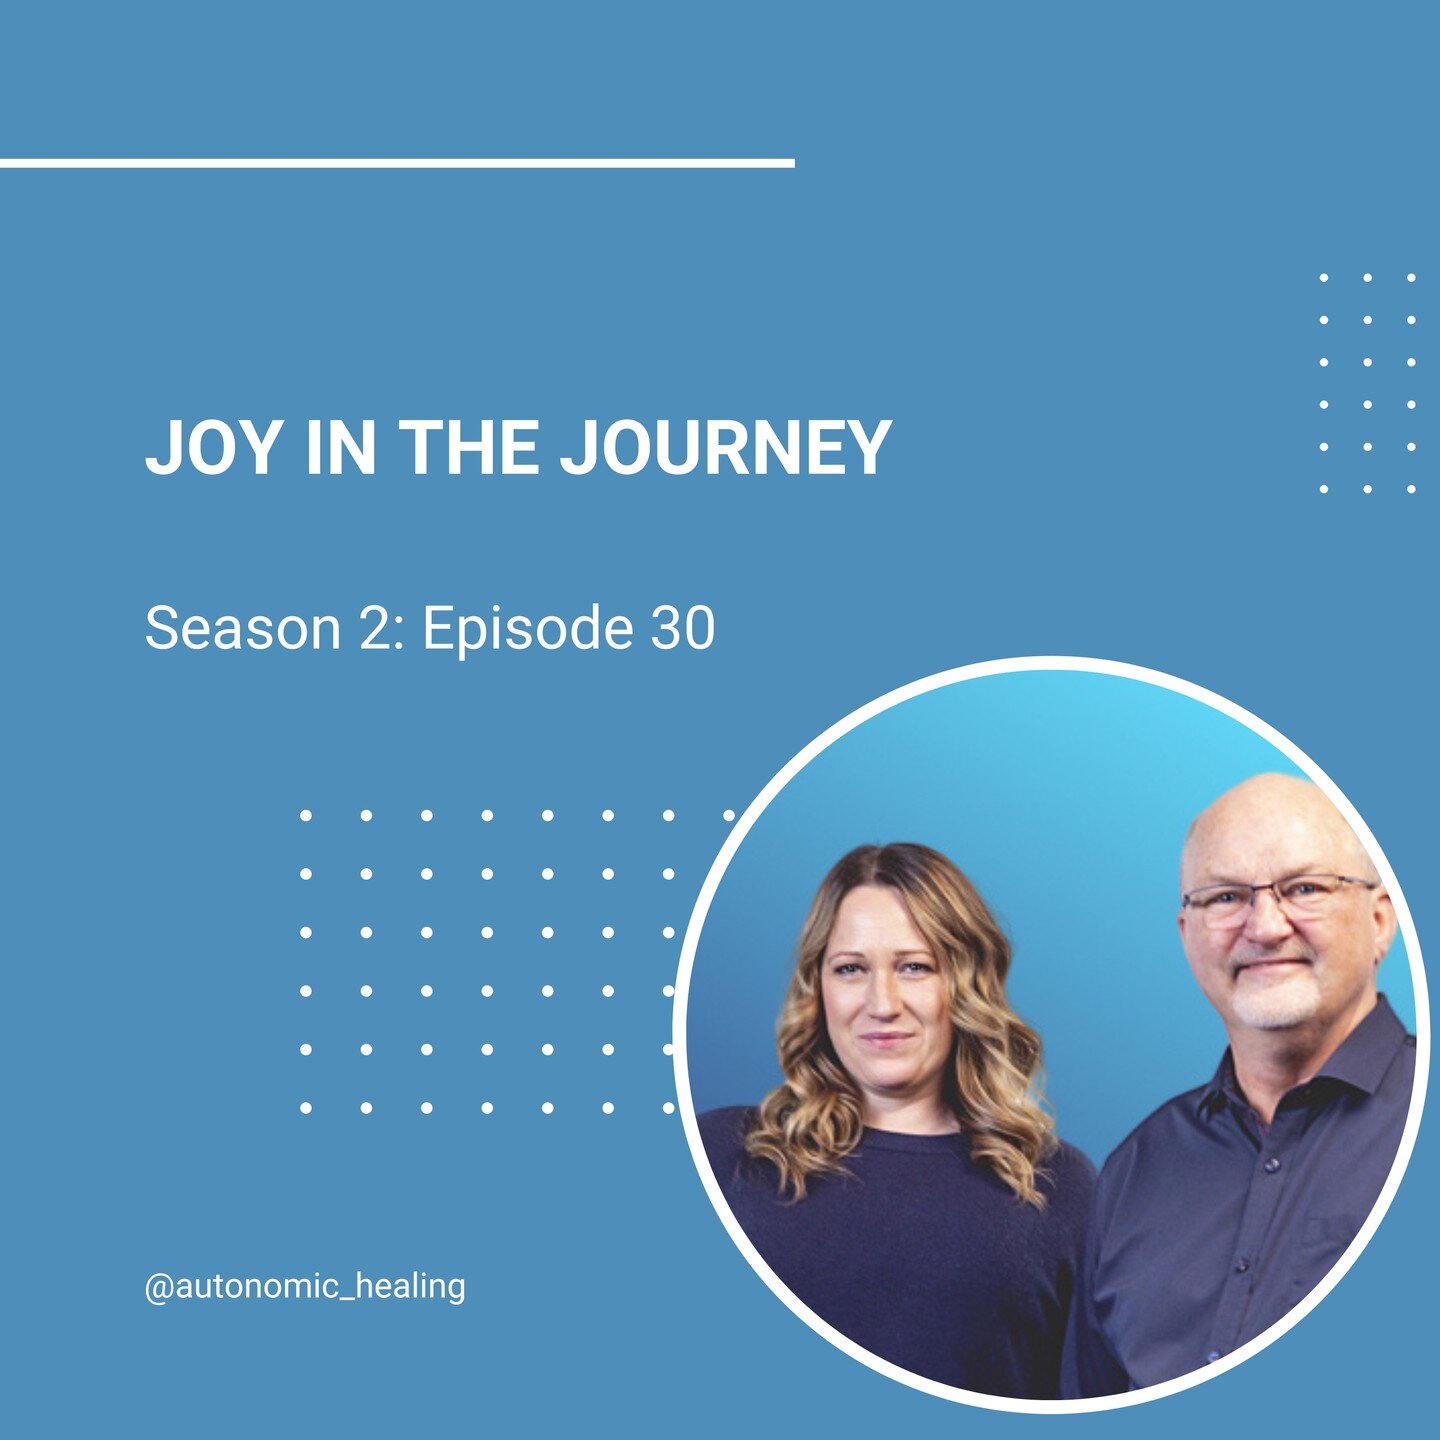 New episode alert! 🎉

We are continuing through our ABC&rsquo;s of Thriving and we&rsquo;re talking all about Joy in Episode 30 💯

In this episode Tom and Ruth explore the concept of joy beyond mere happiness, delving into its connection to well-be